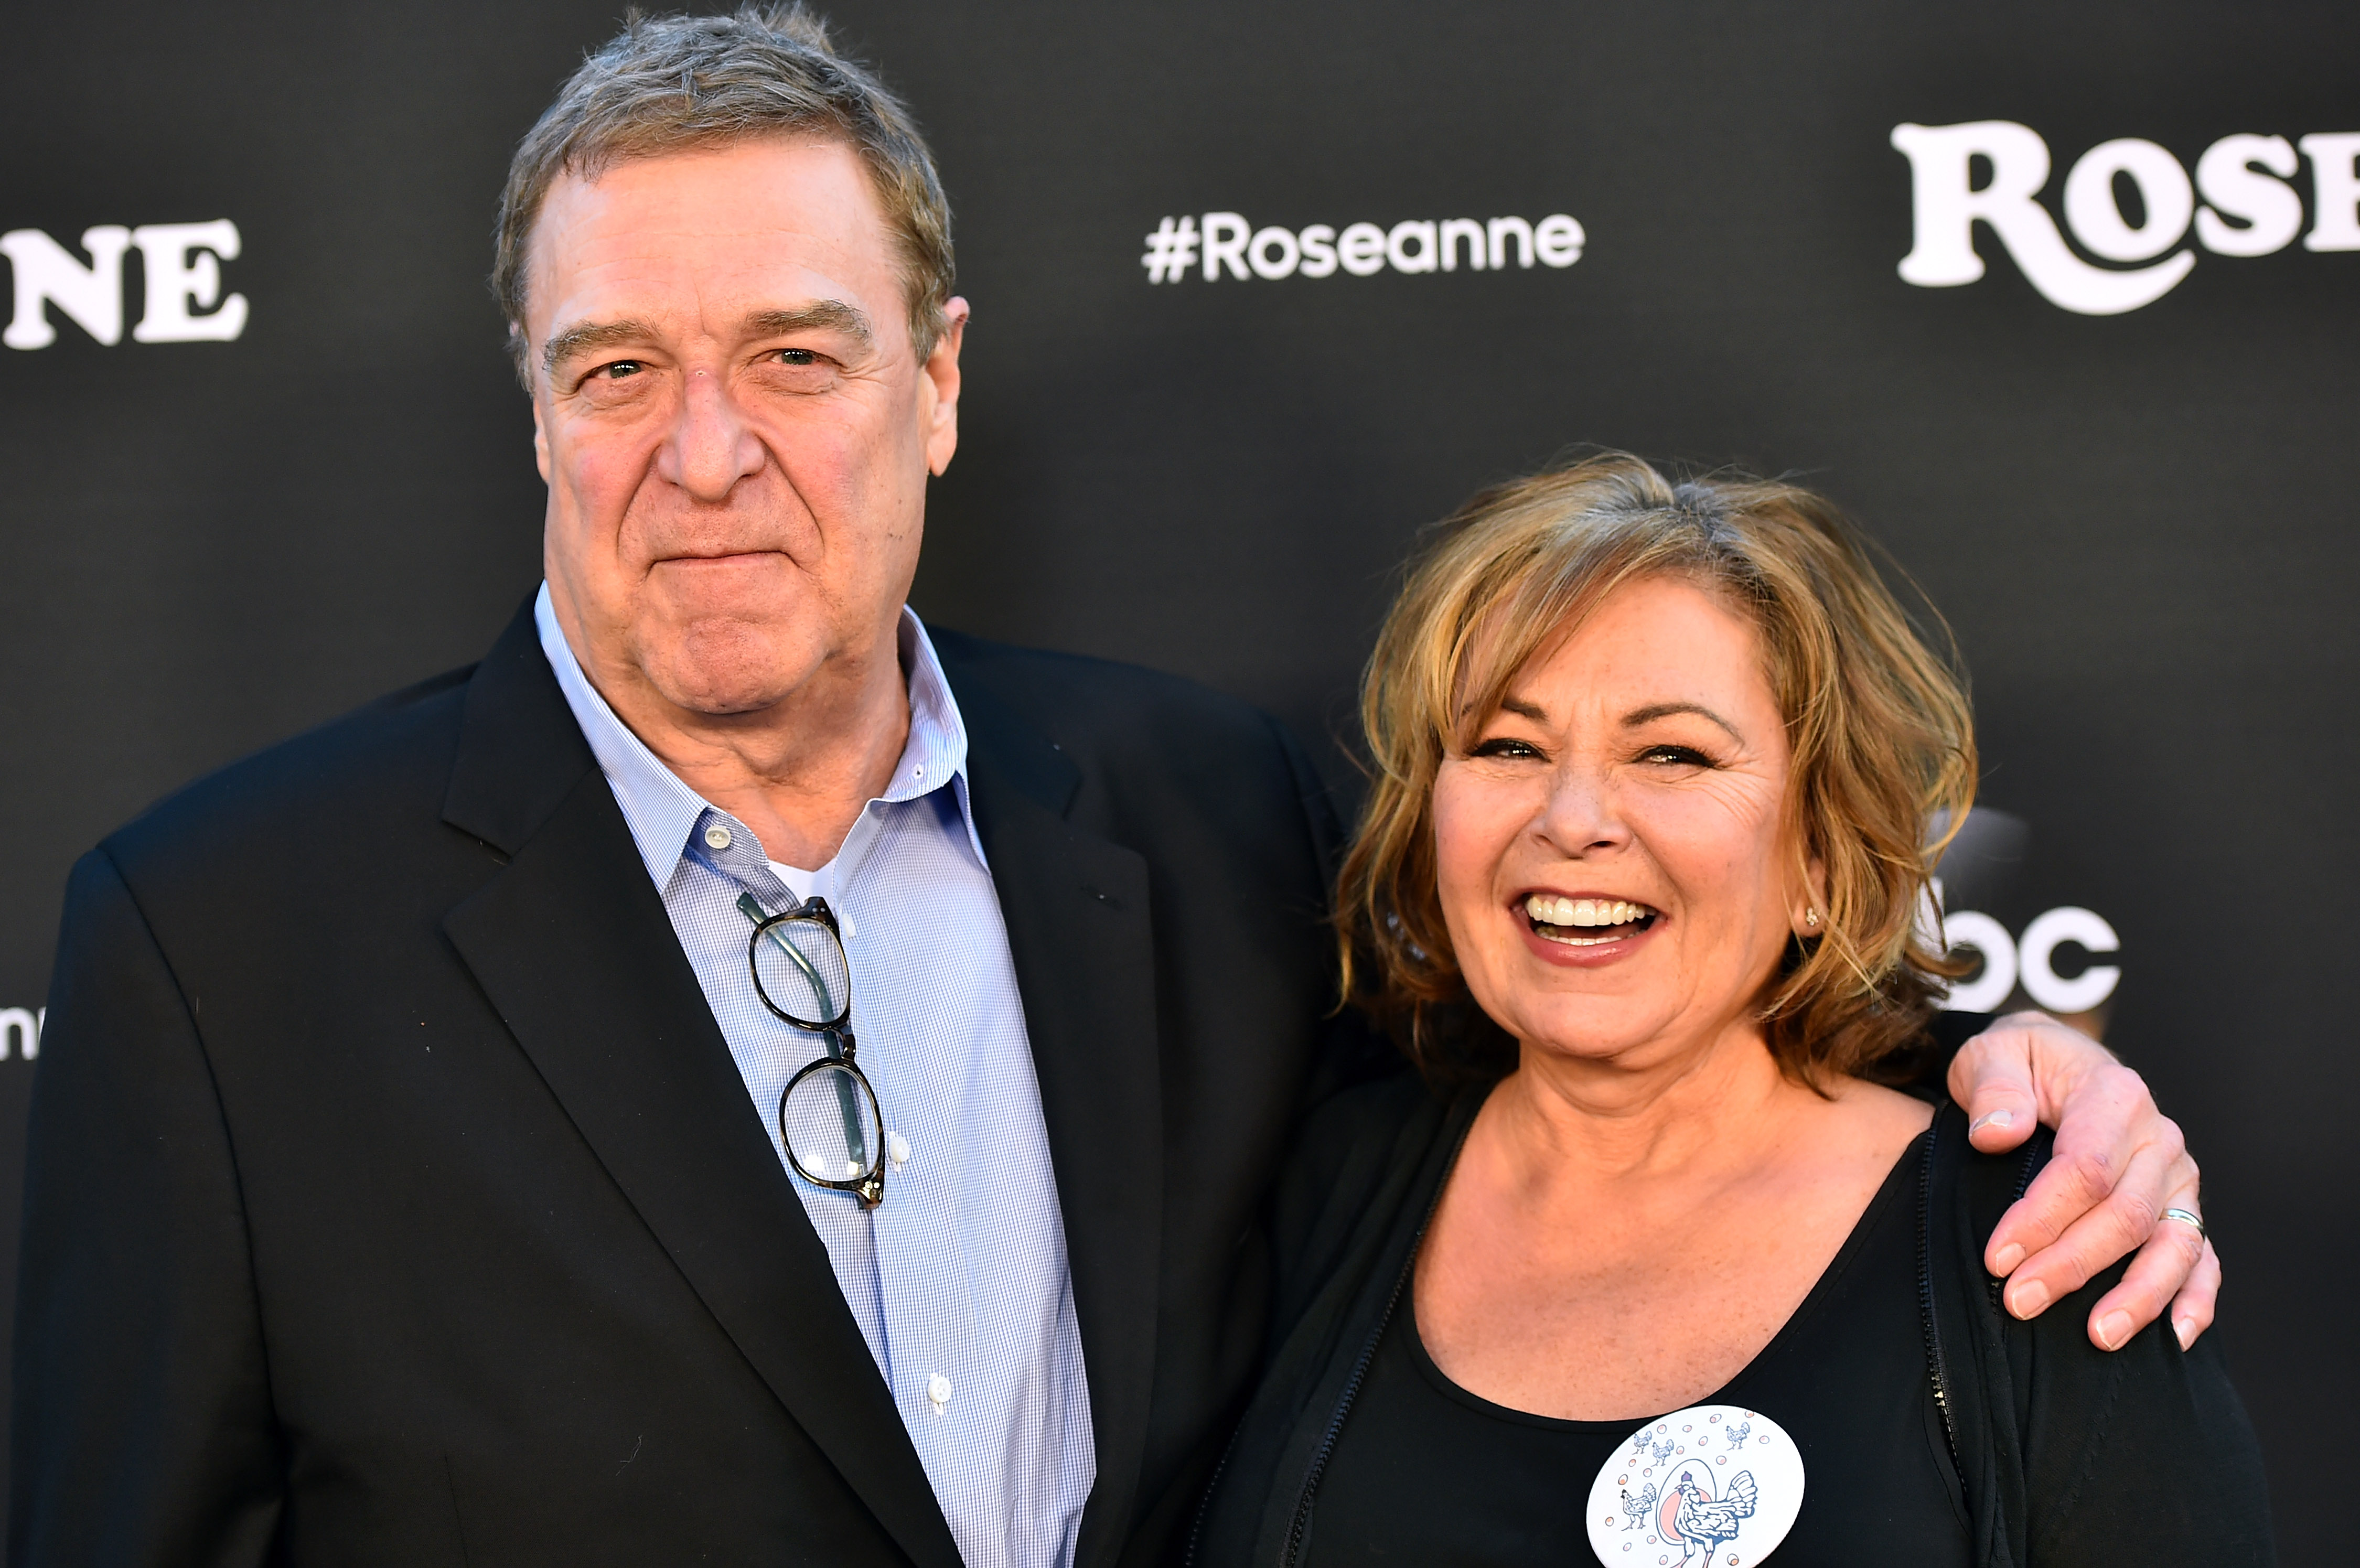 John Goodman and Roseanne Barr on March 23, 2018 in Burbank, California. | Source: Getty Images